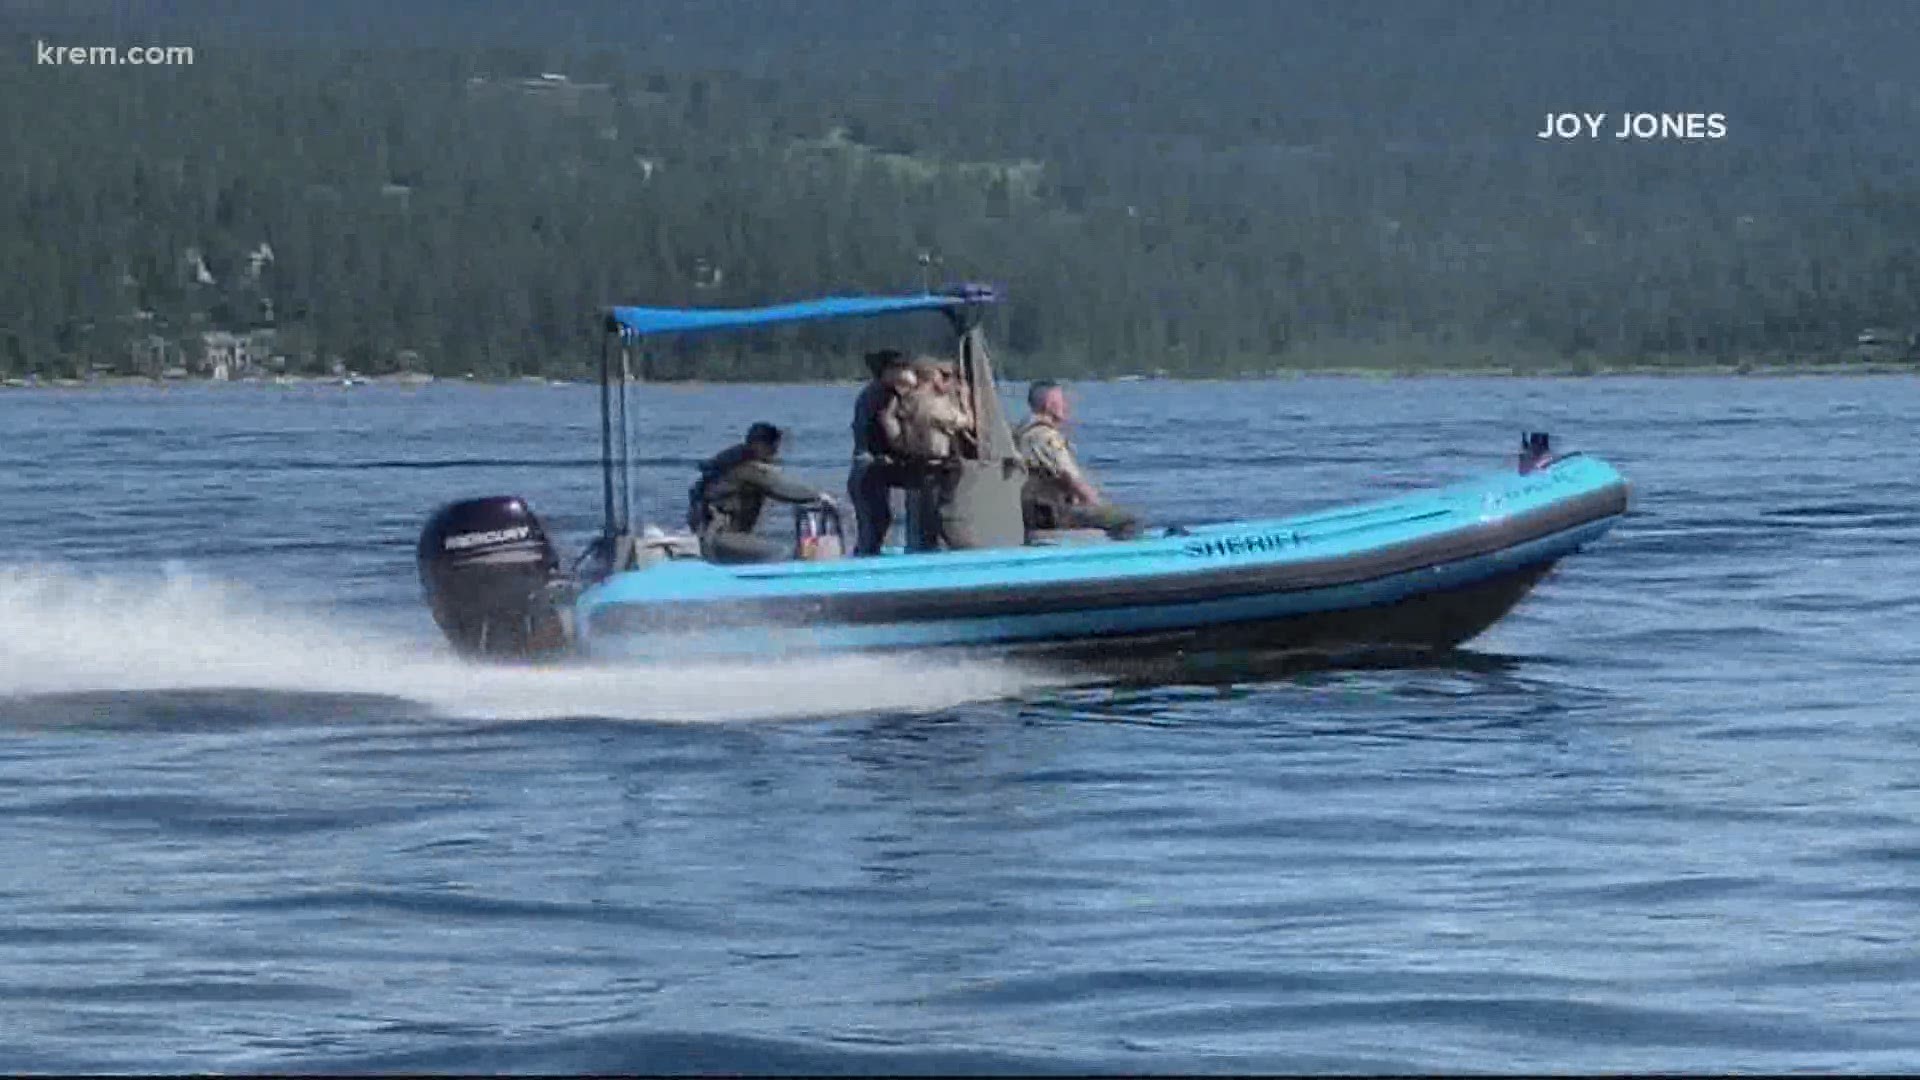 What We Know About The Victims Of Fatal Lake Coeur Dalene Plane Crash 